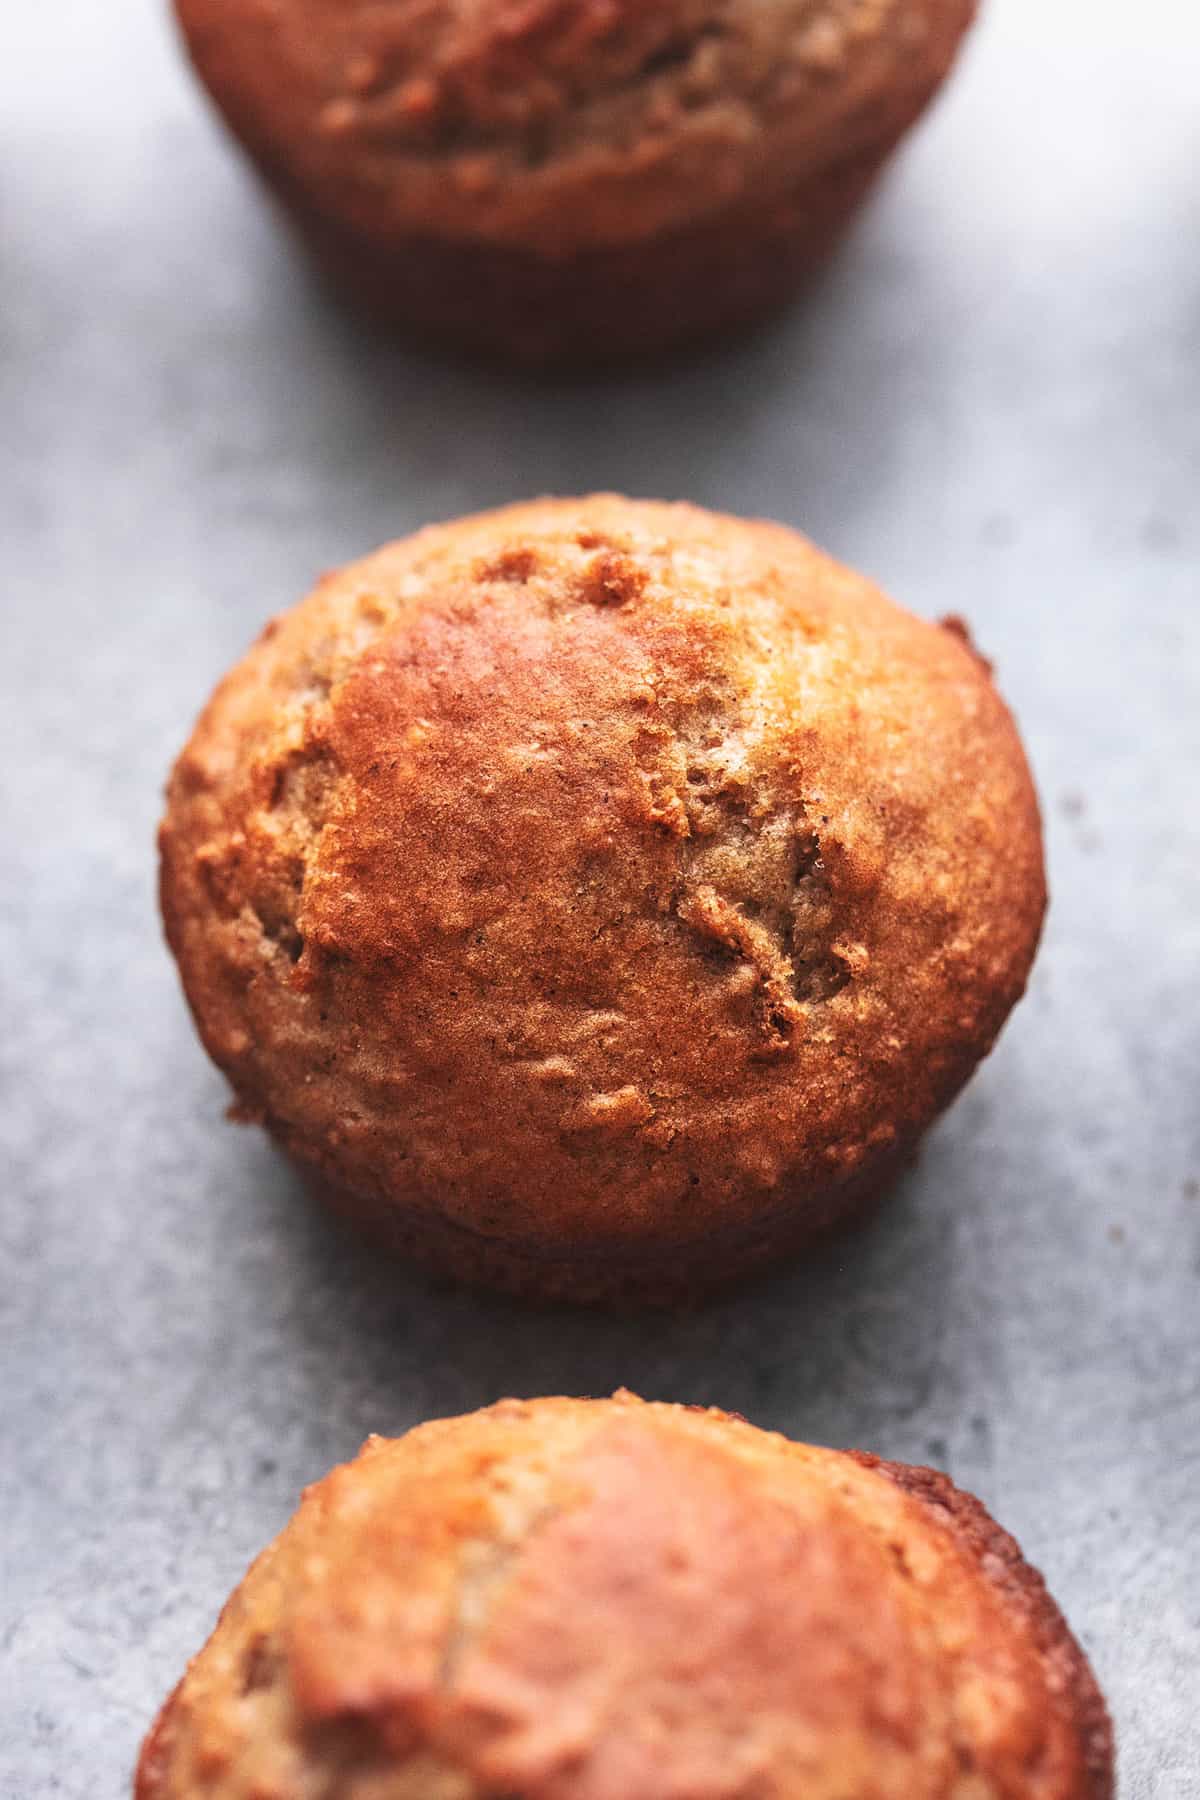 close up of a bran muffin with another muffin above and below it.